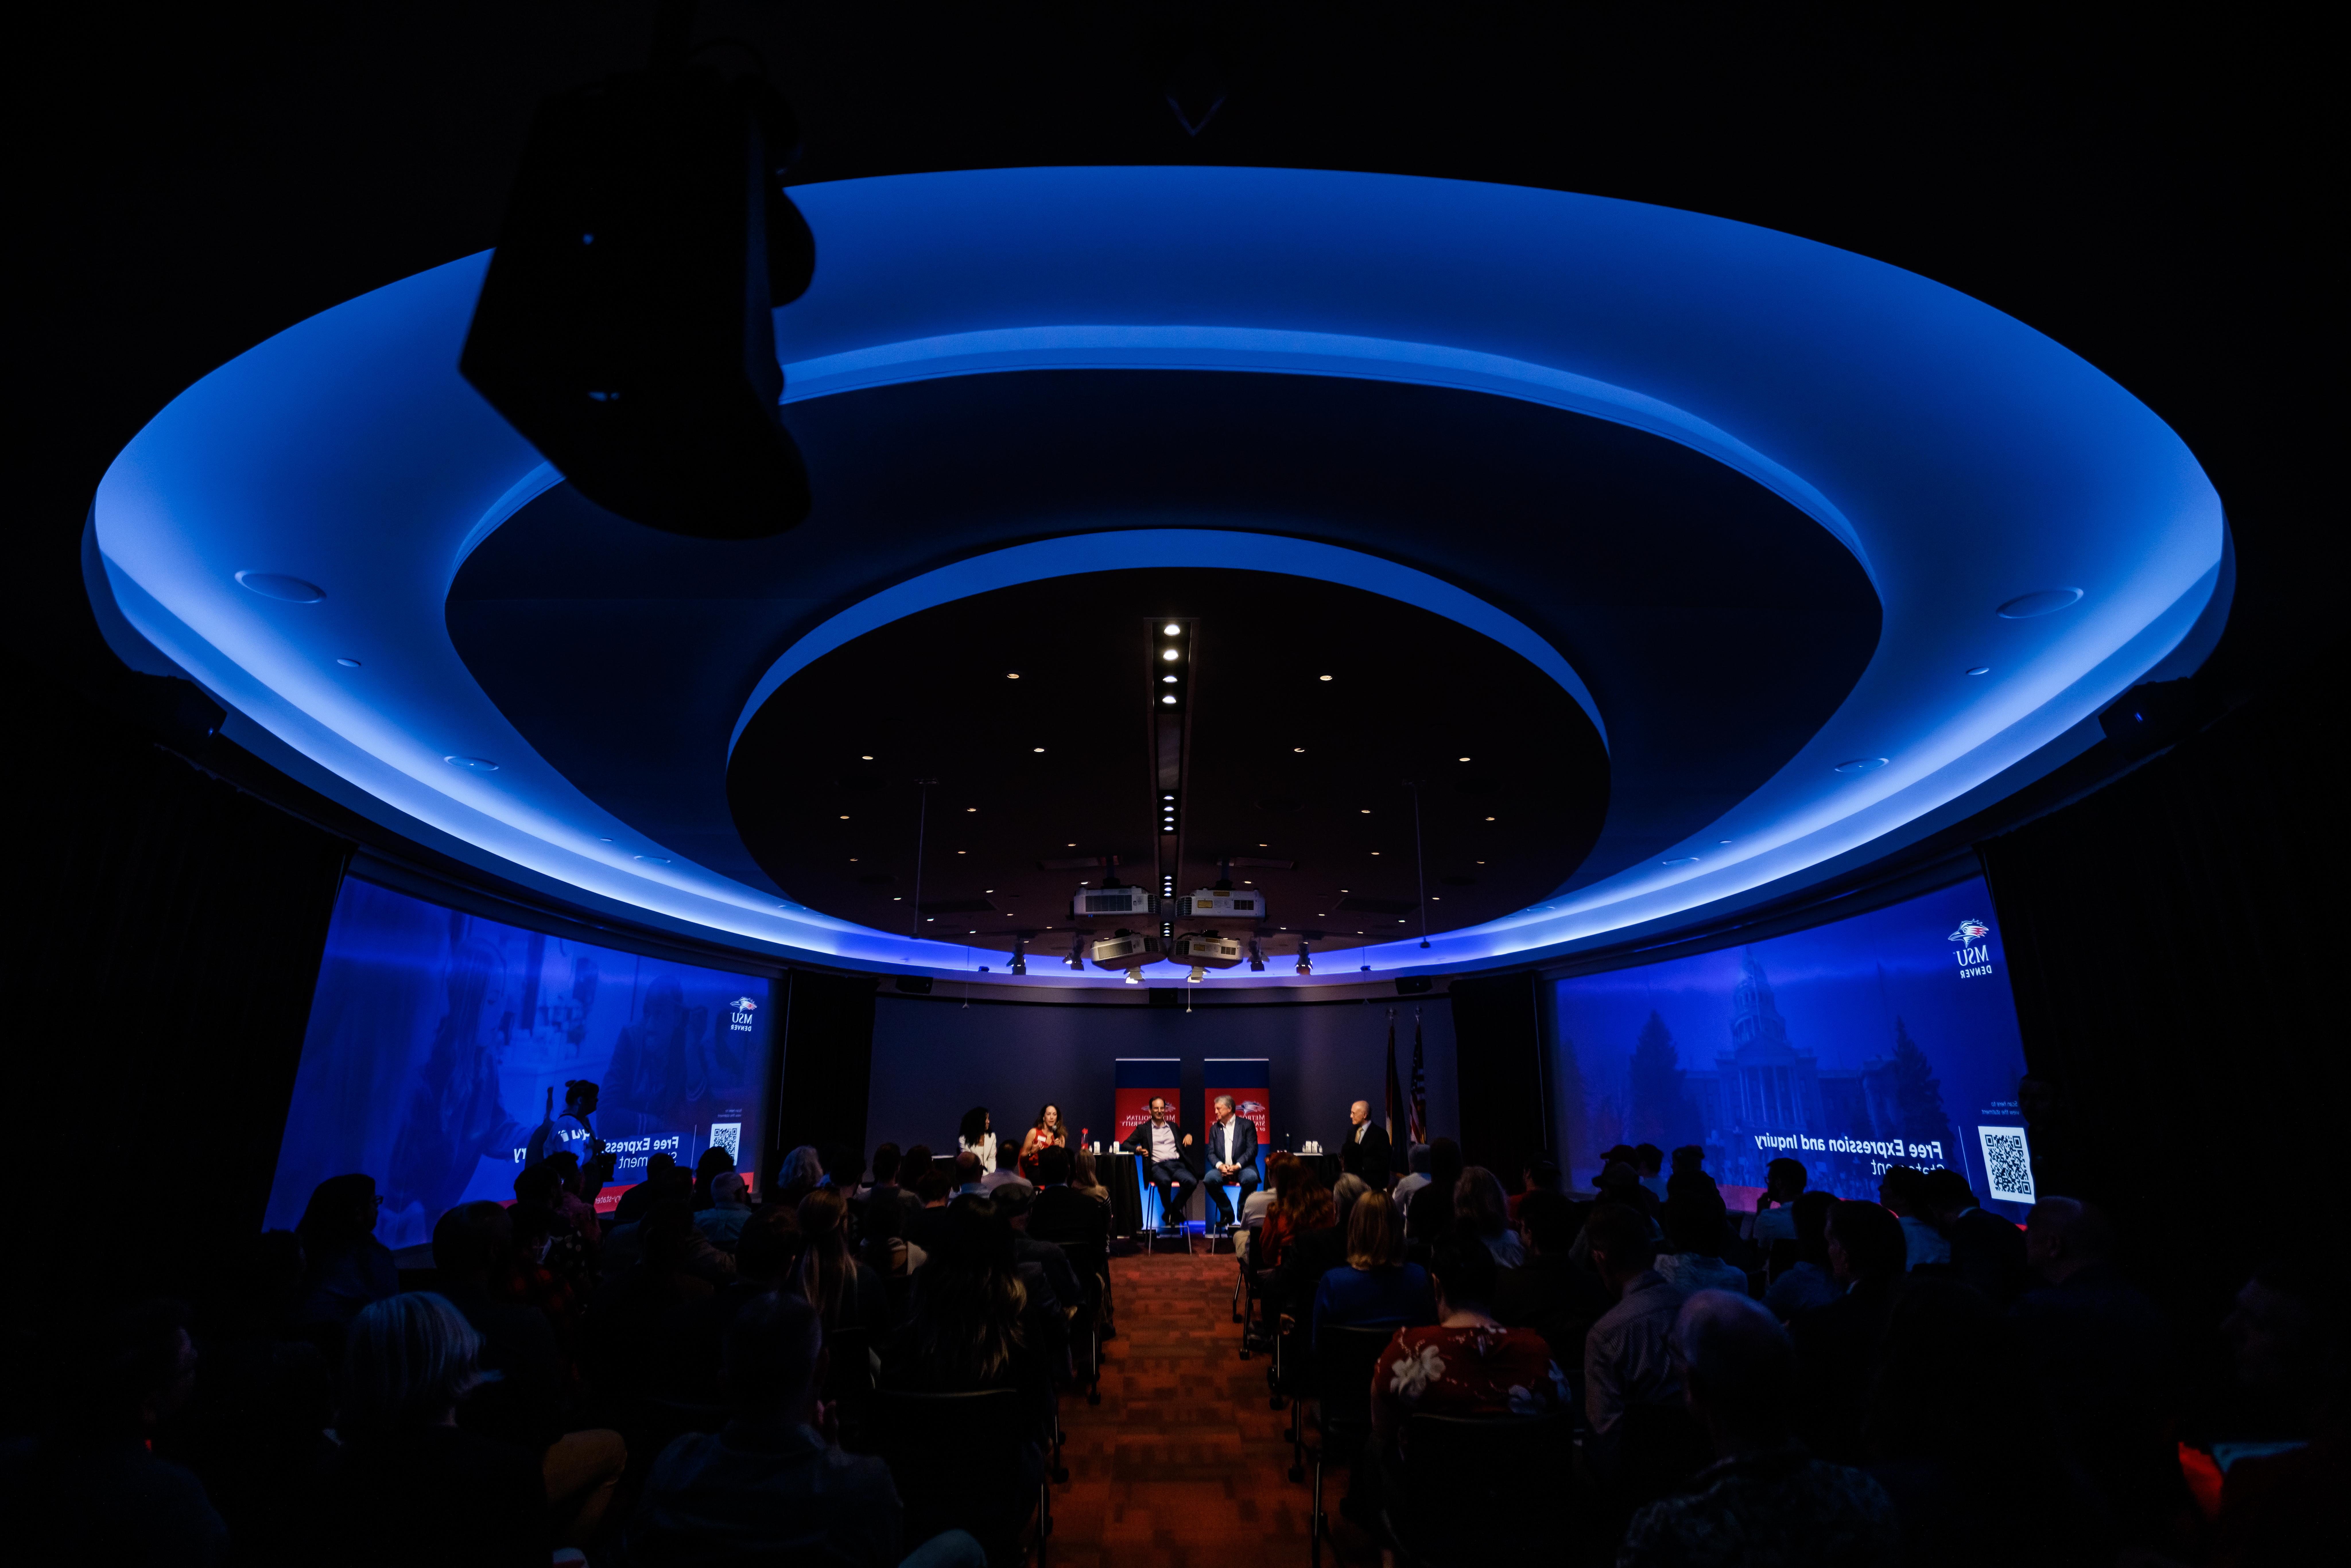 The darkened CAVEA Theater is highlighted by it's custom blue ceiling lighting.